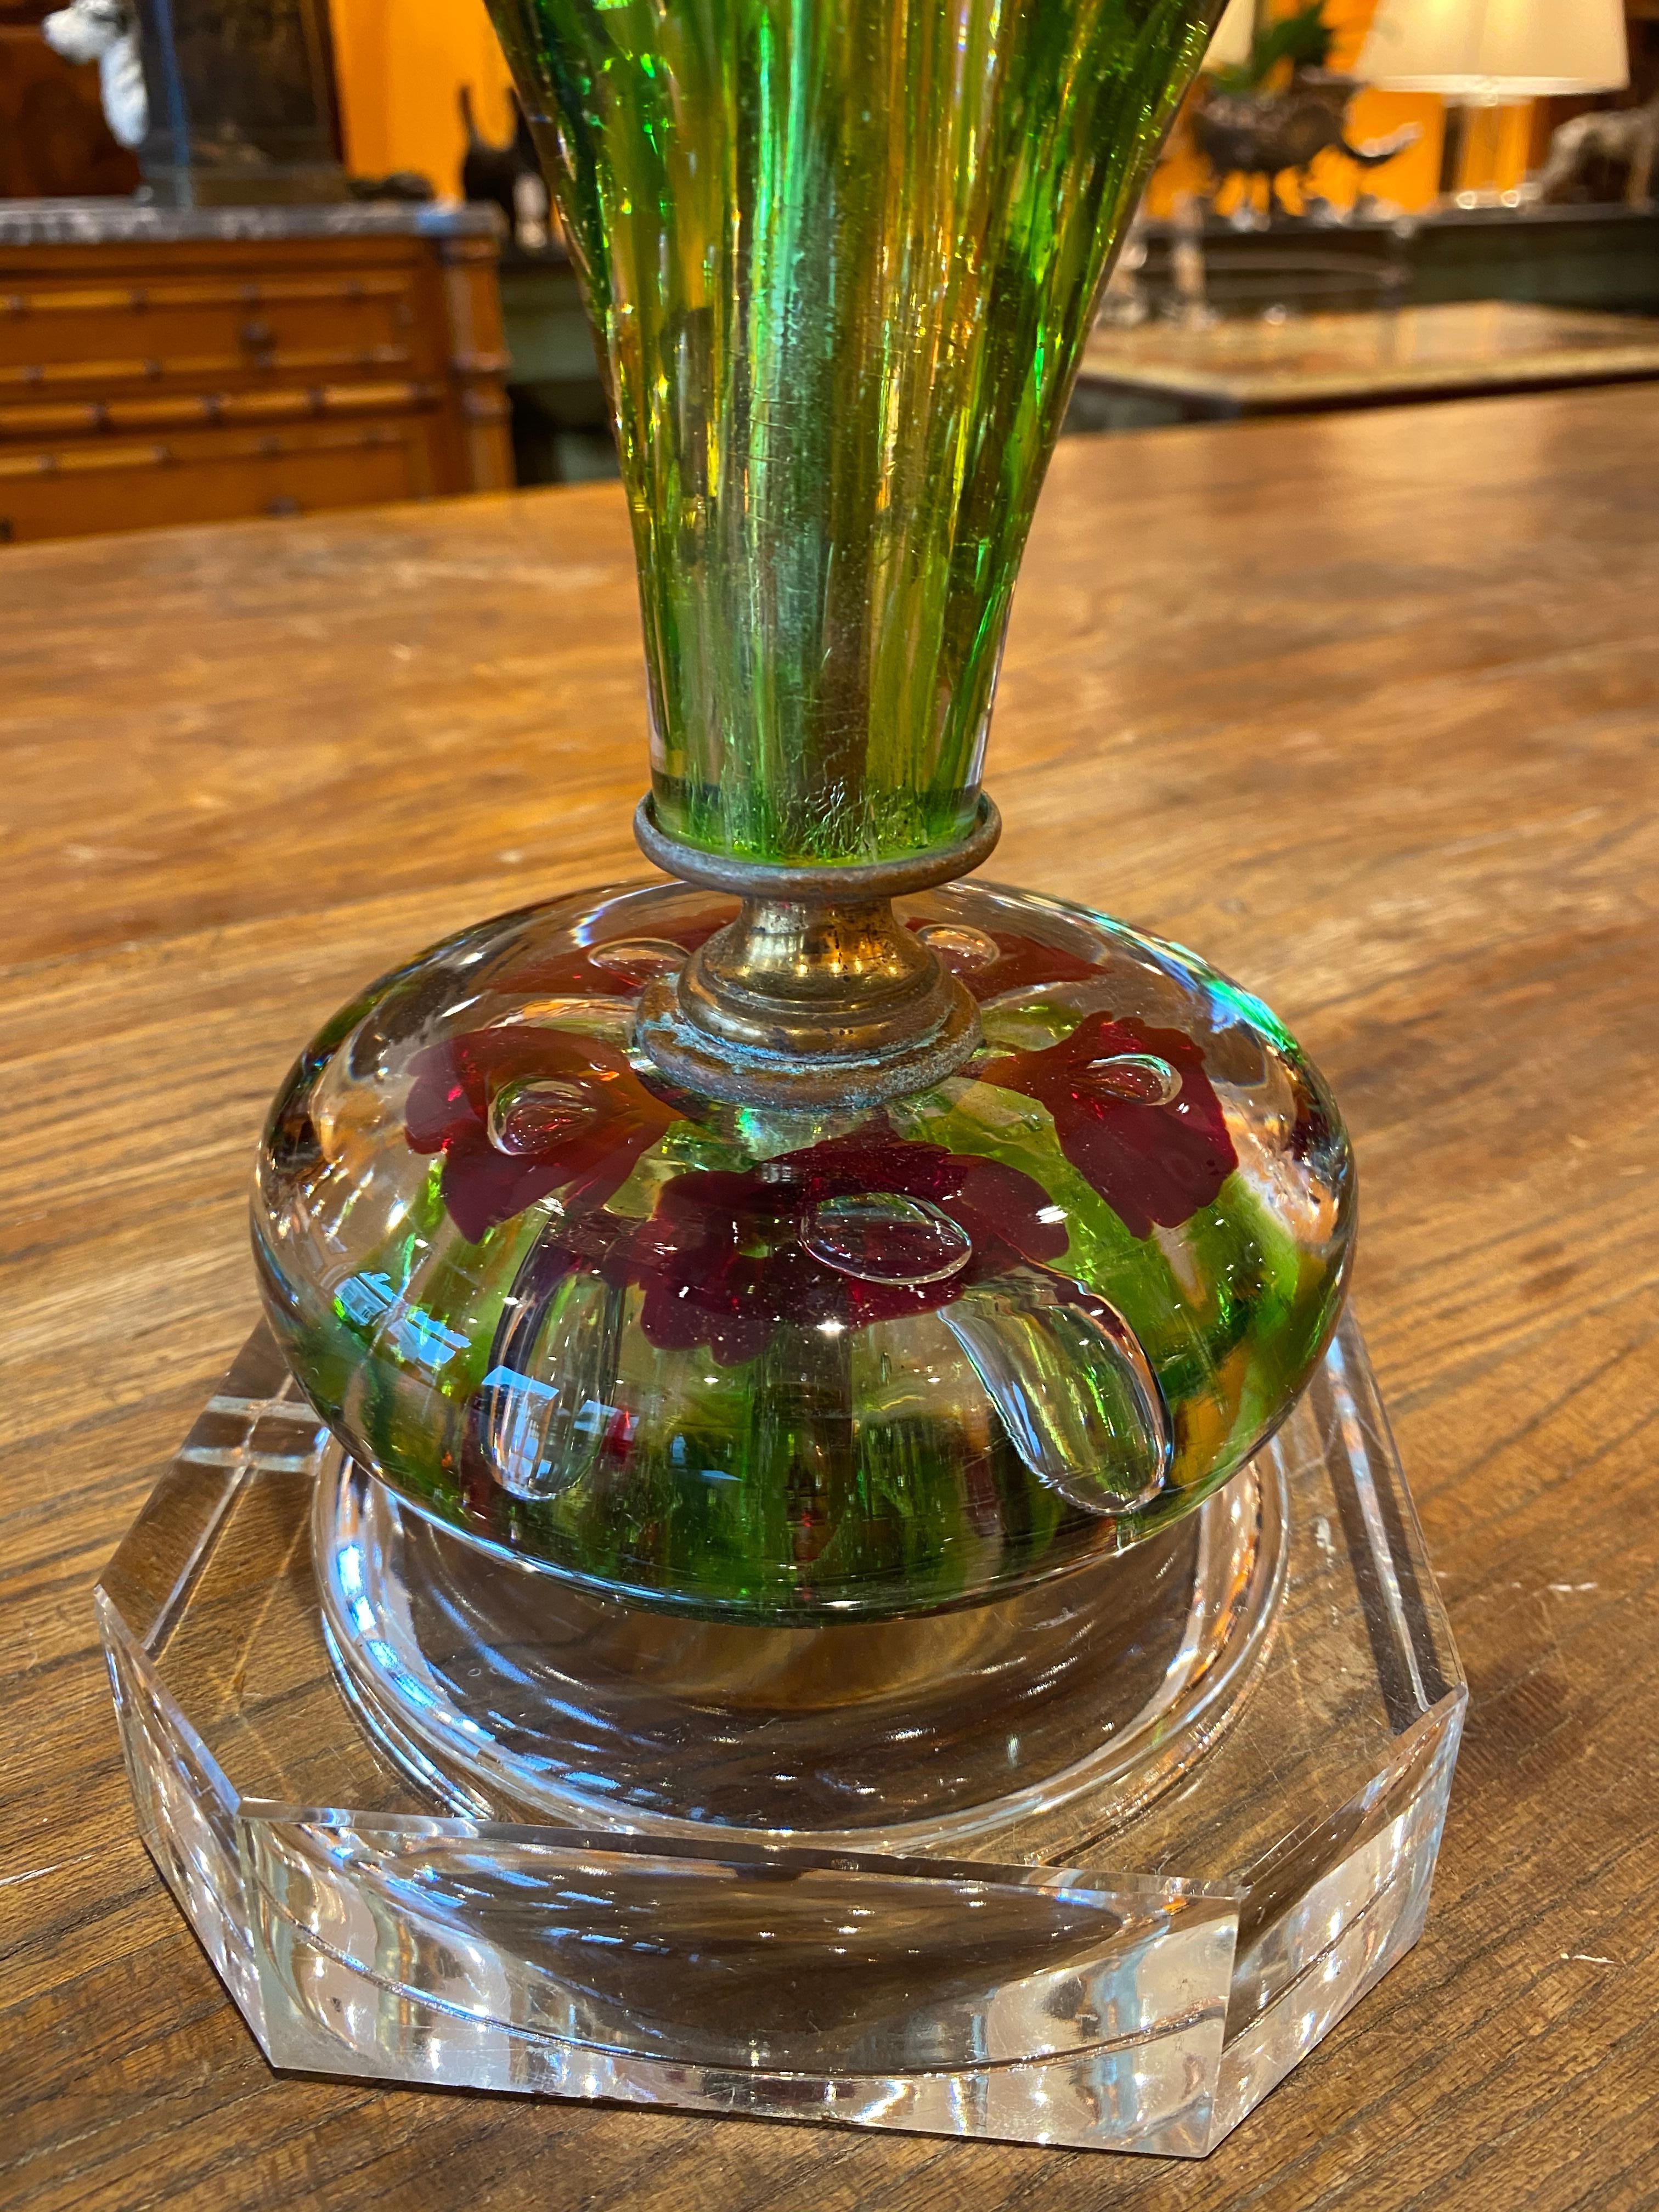 American St. Clair paperweight glass lamp, mid-20th century.